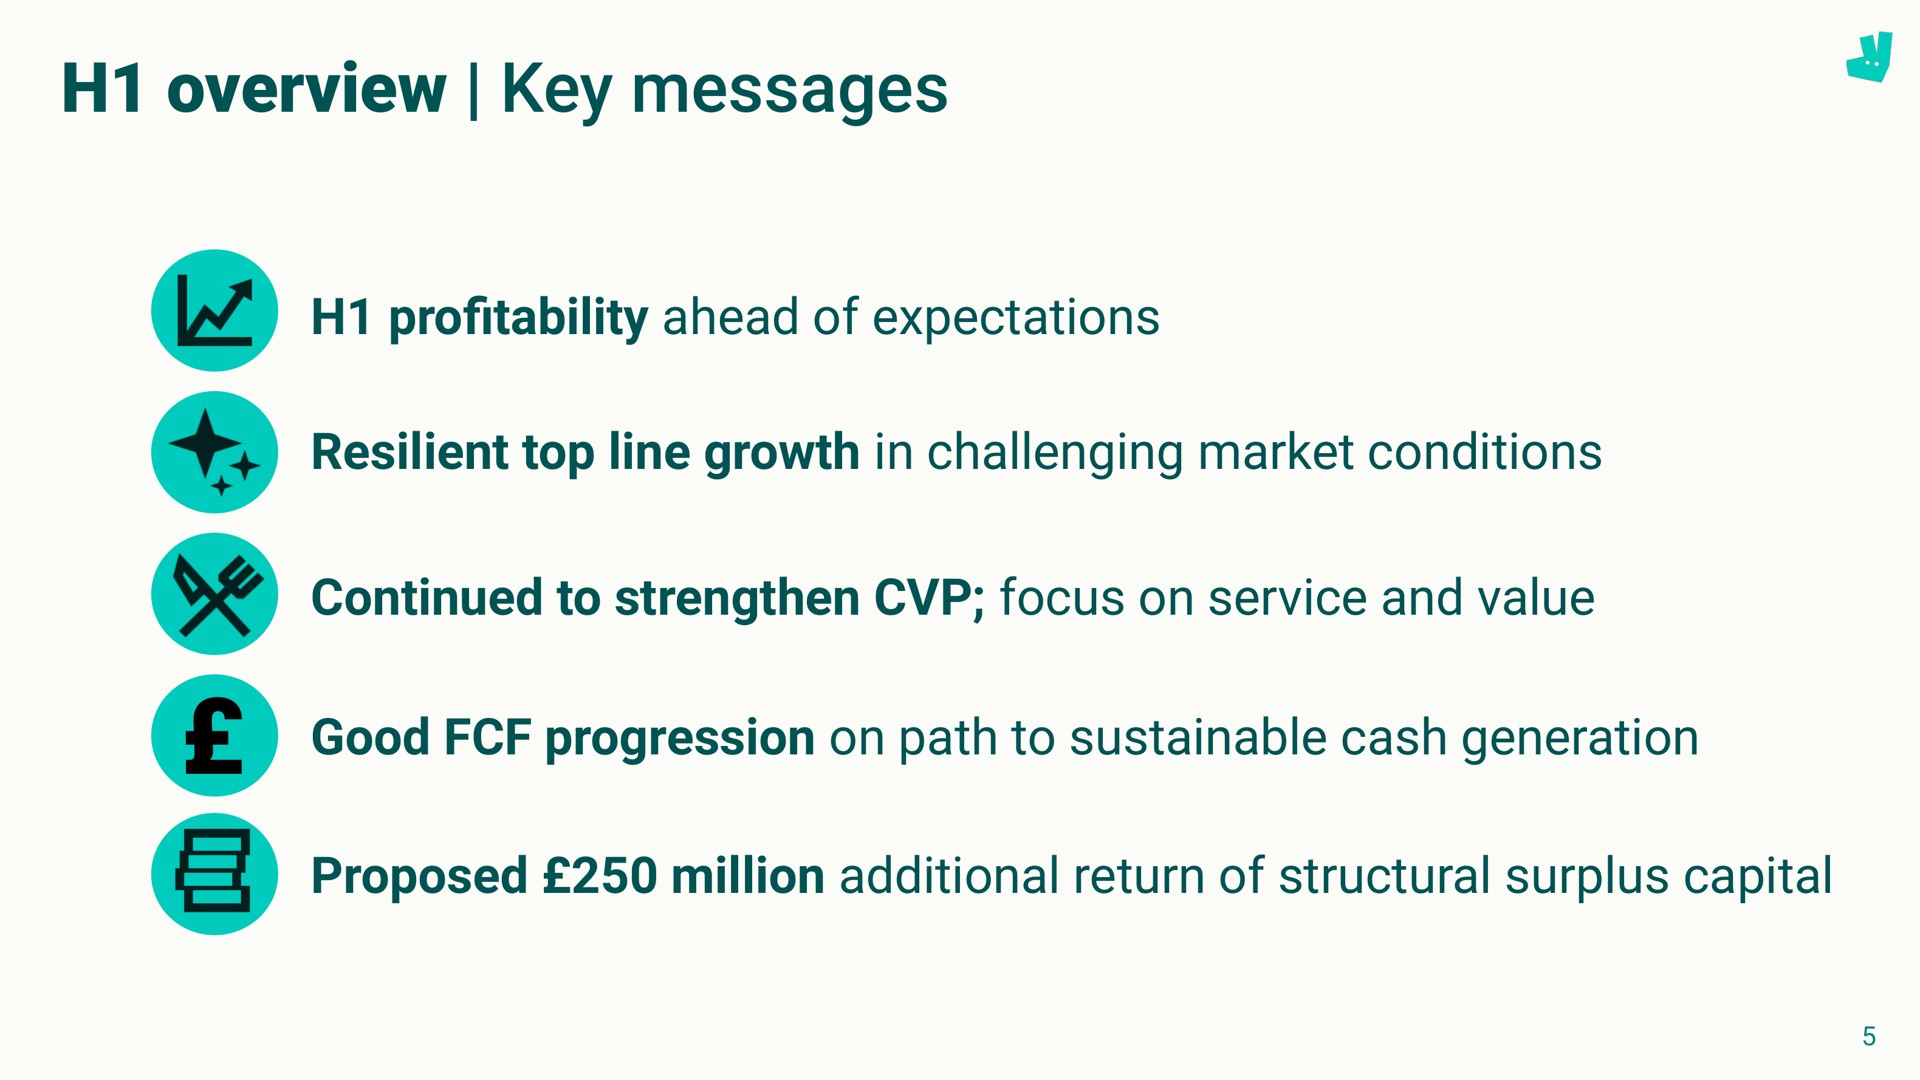 overview key messages | Deliveroo